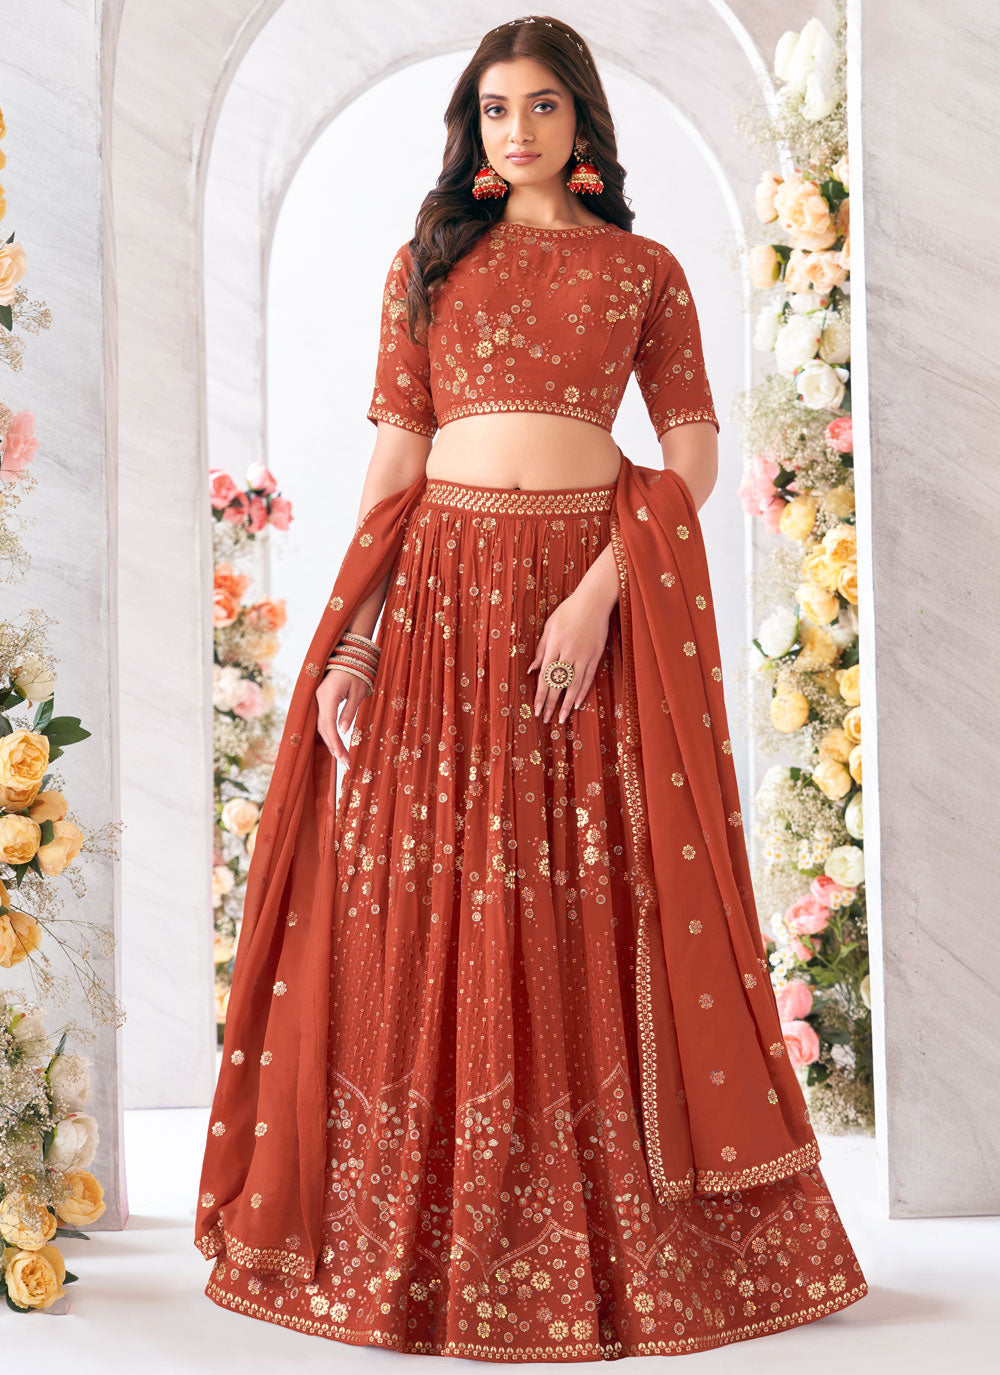 Staring Brown Georgette Readymade Lehenga Choli With Embroidered, Resham And Sequins Work